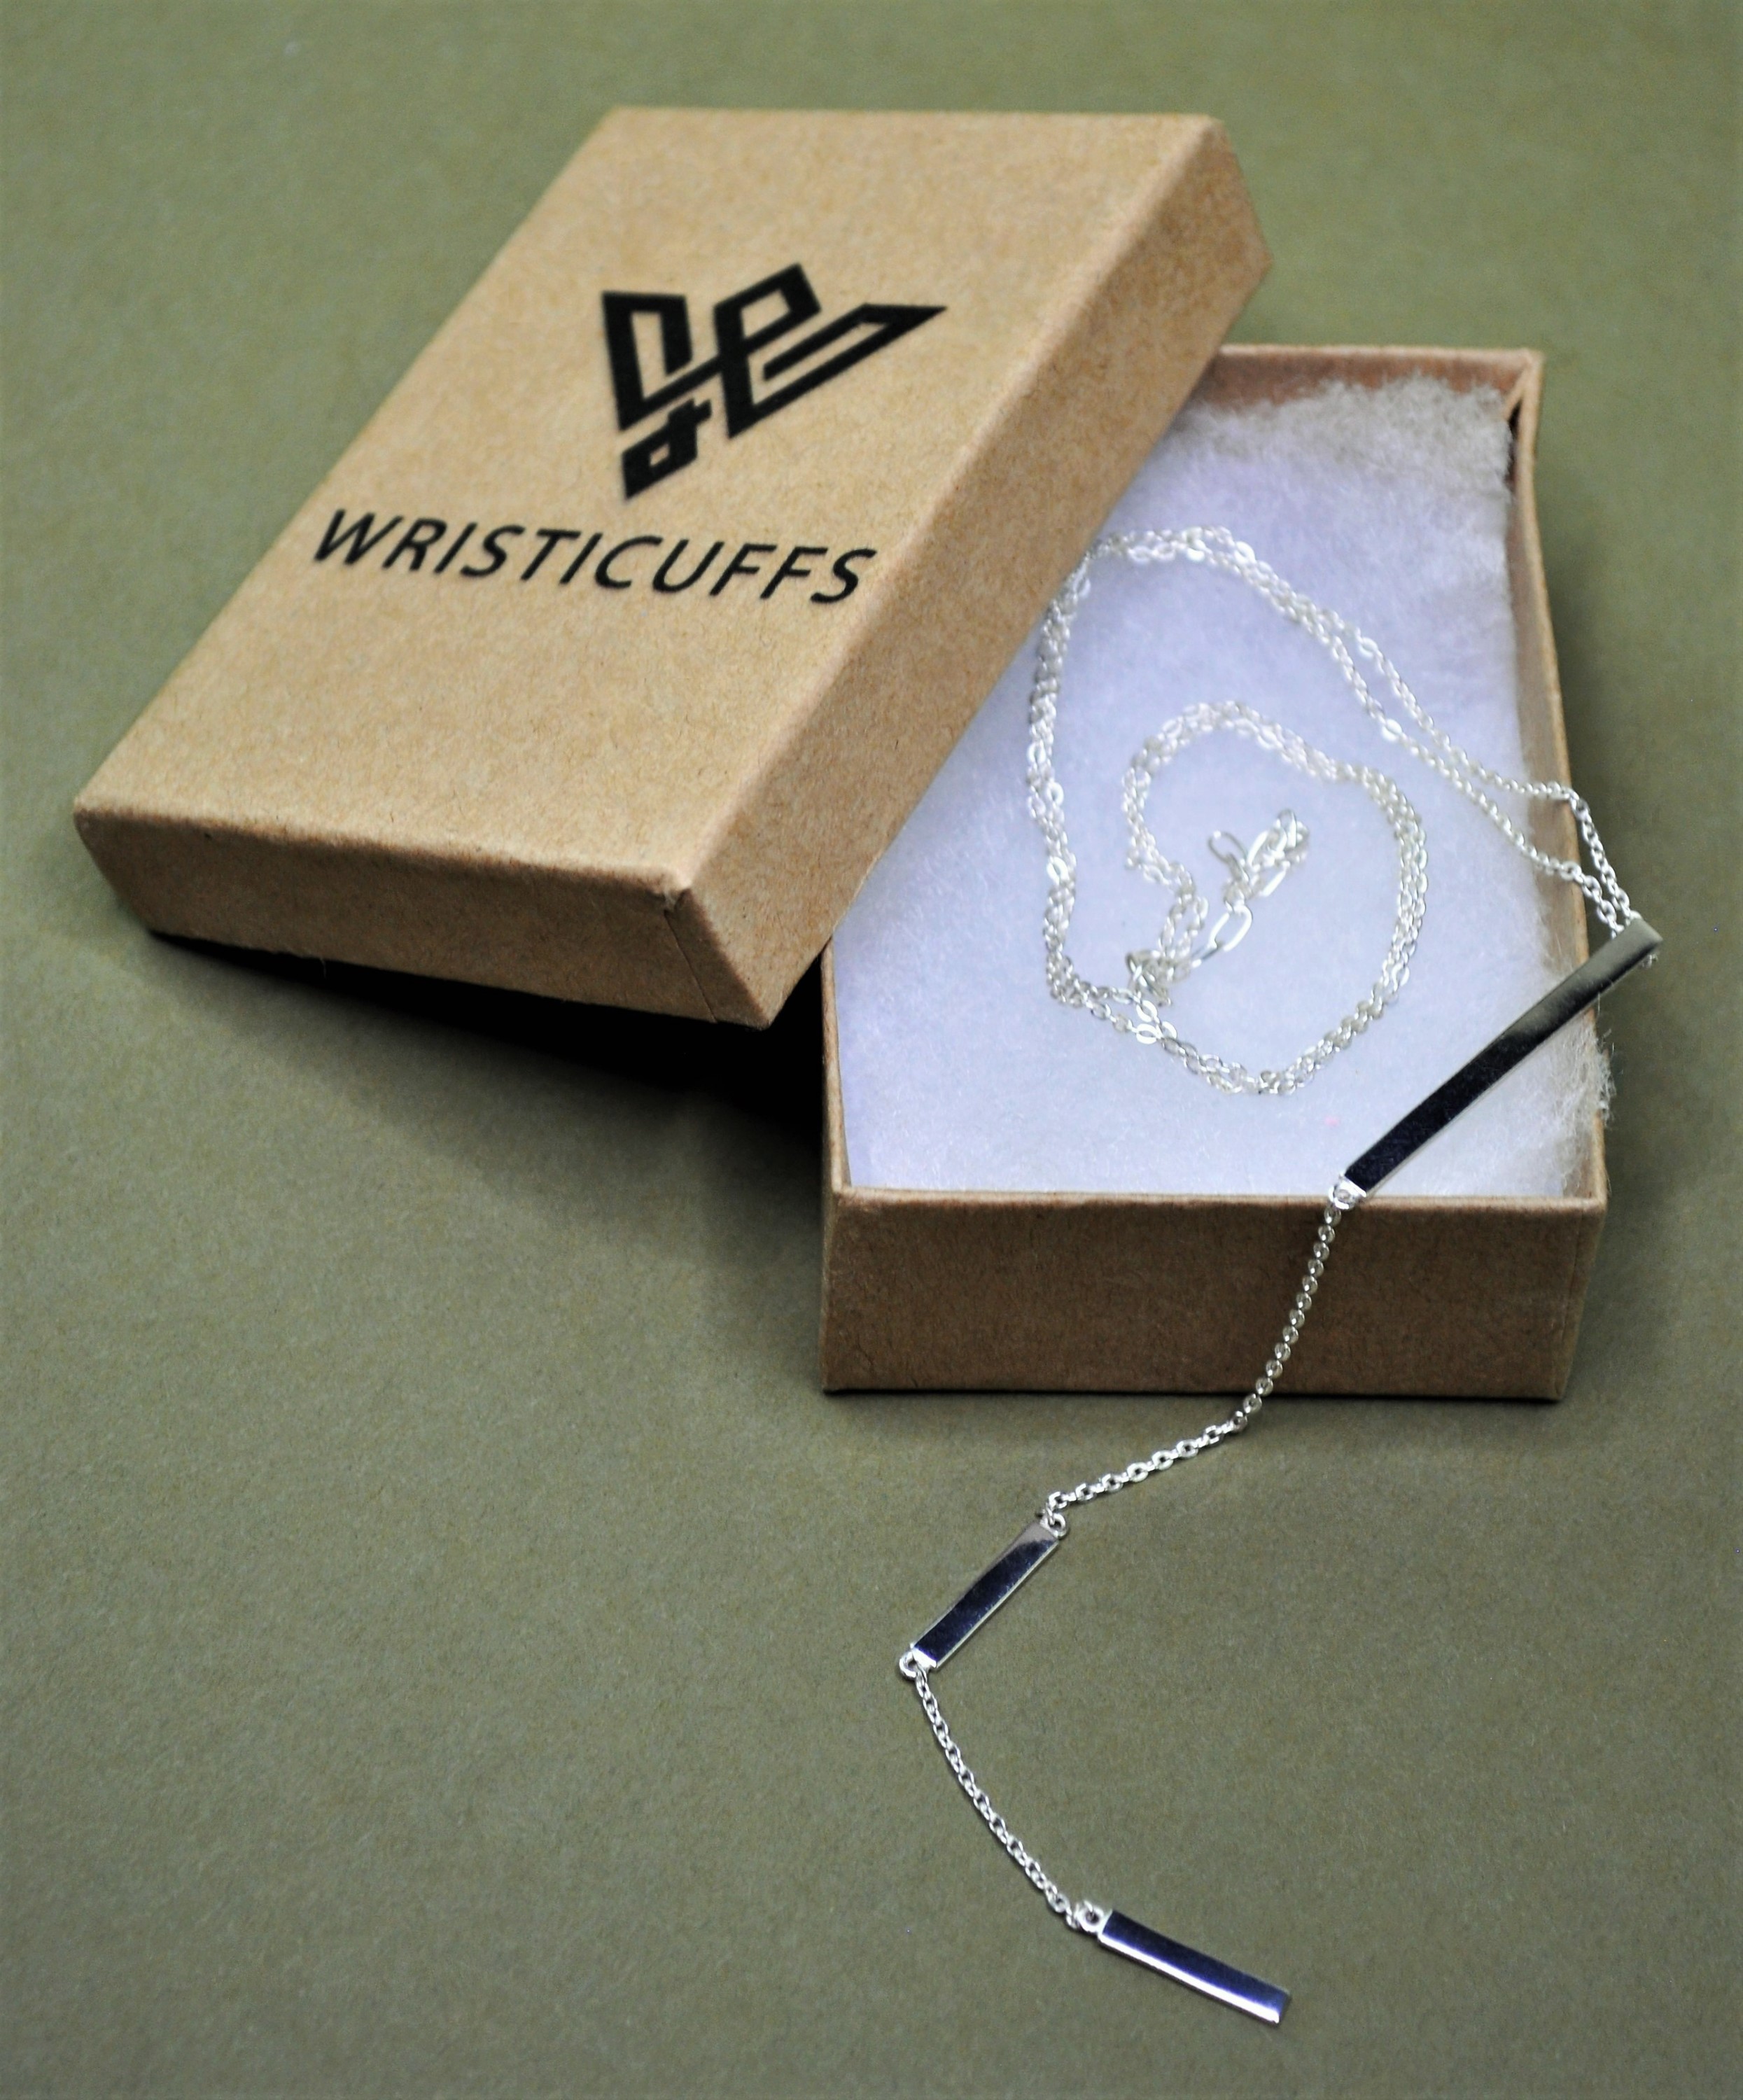 Sterling Silver Lariat Necklace Wristicuffs